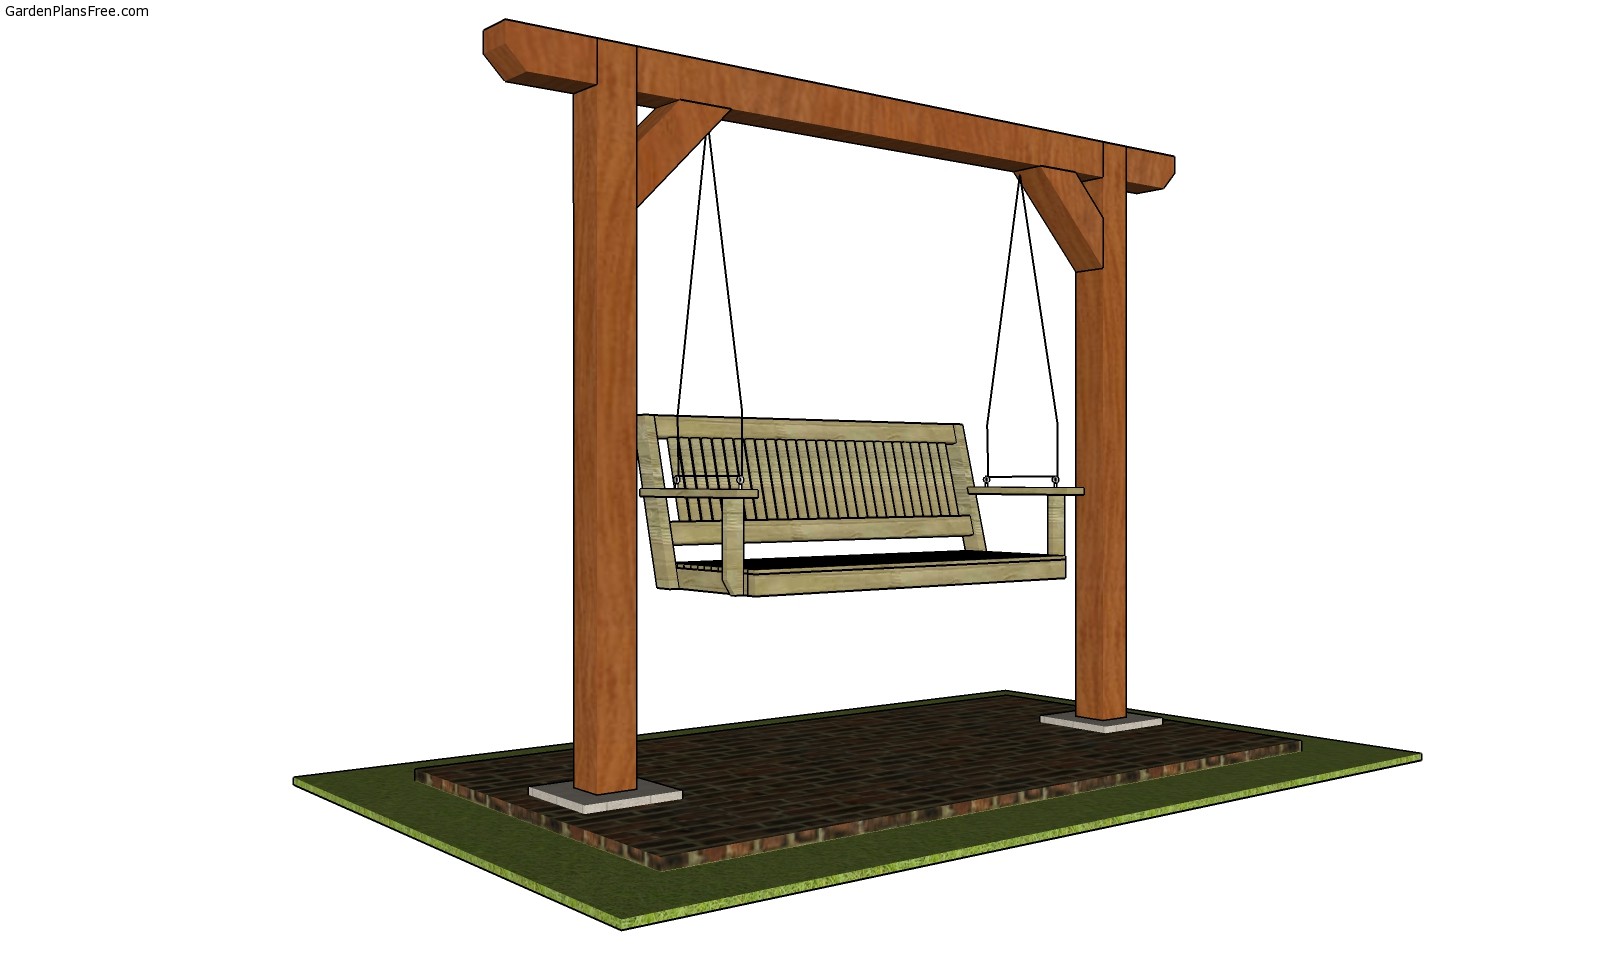 How To Build Swing Frame 2 Post Swing Set - Free DIY Plans